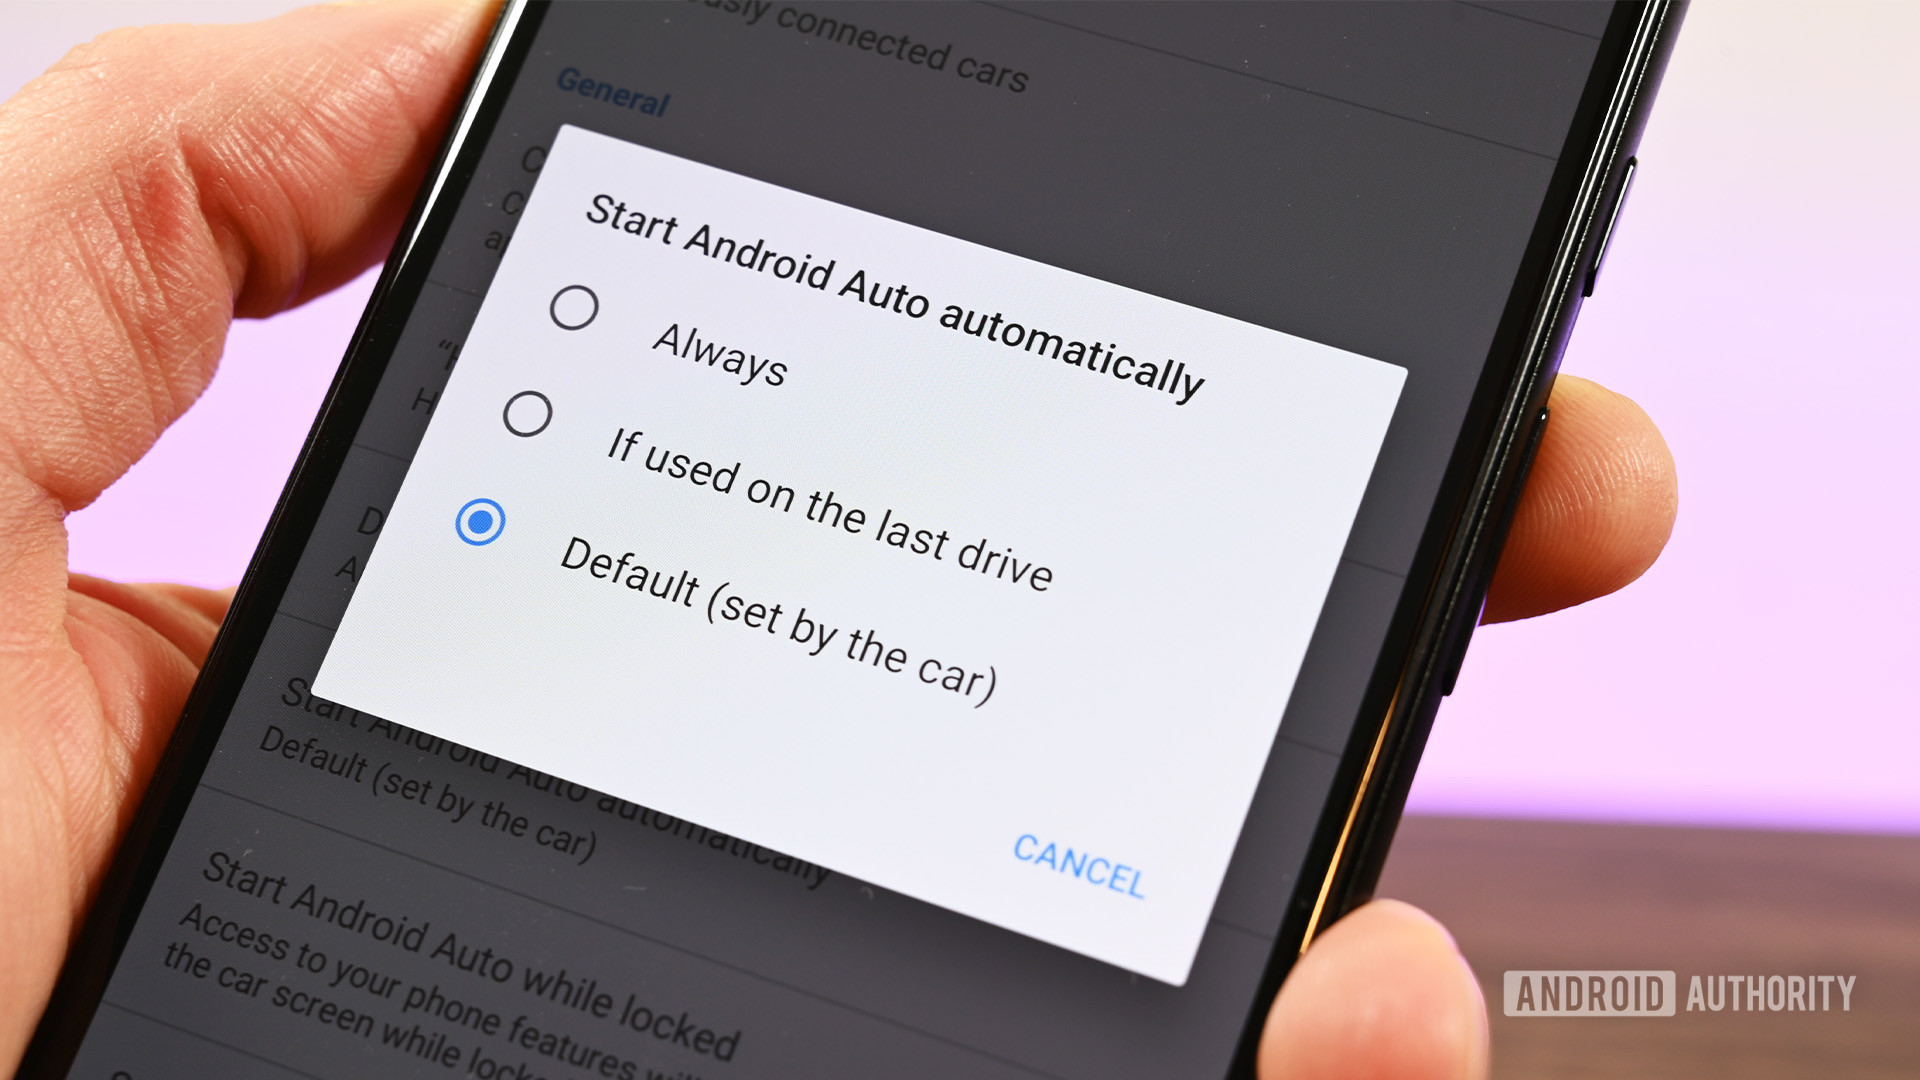 Start Android Auto Automatically